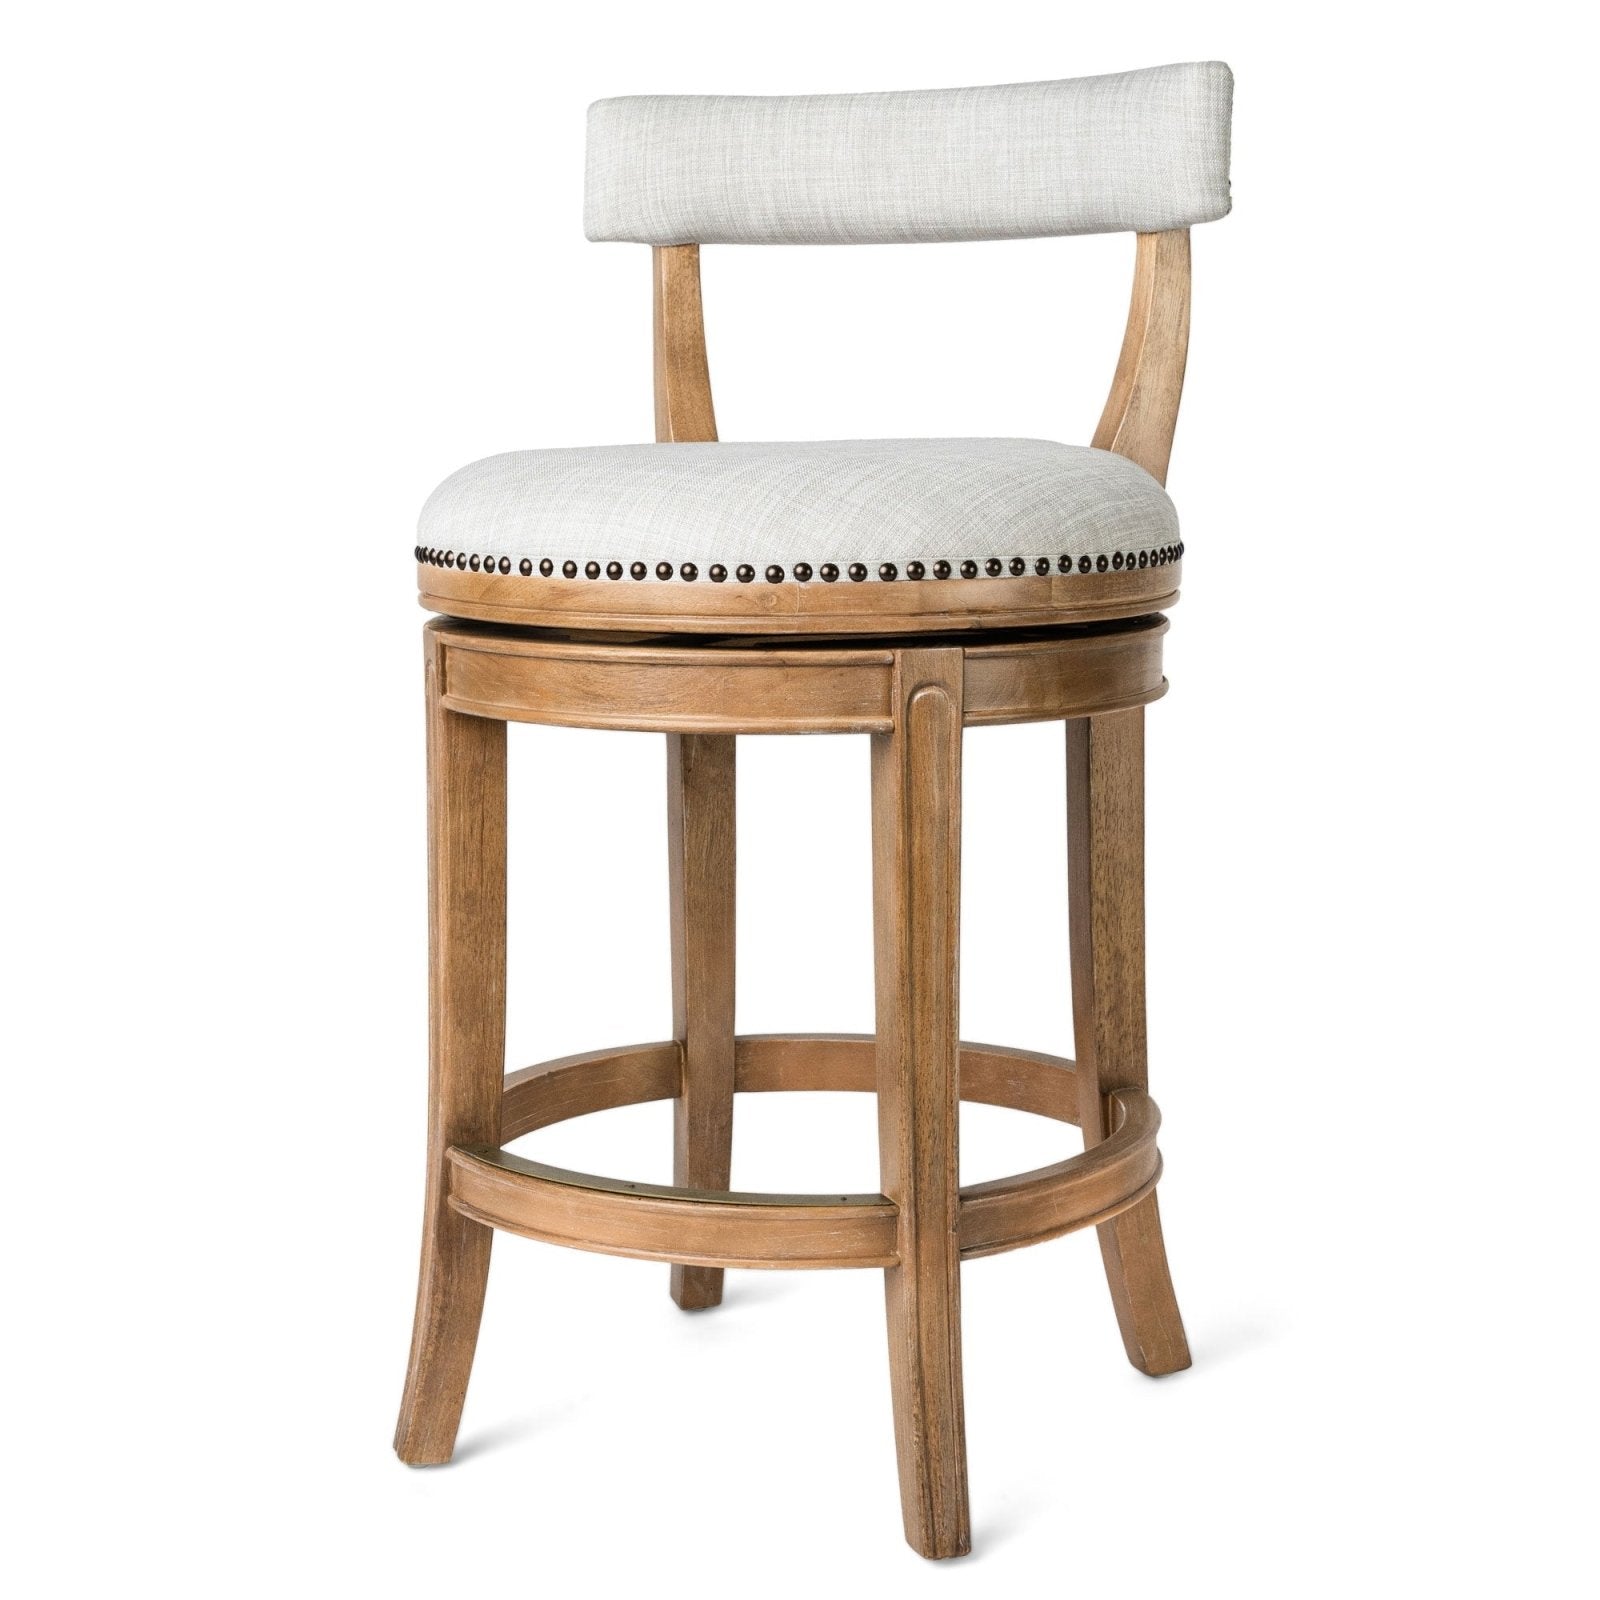 Alexander Counter Stool in Weathered Oak Finish w/ Sand Color Fabric Upholstery